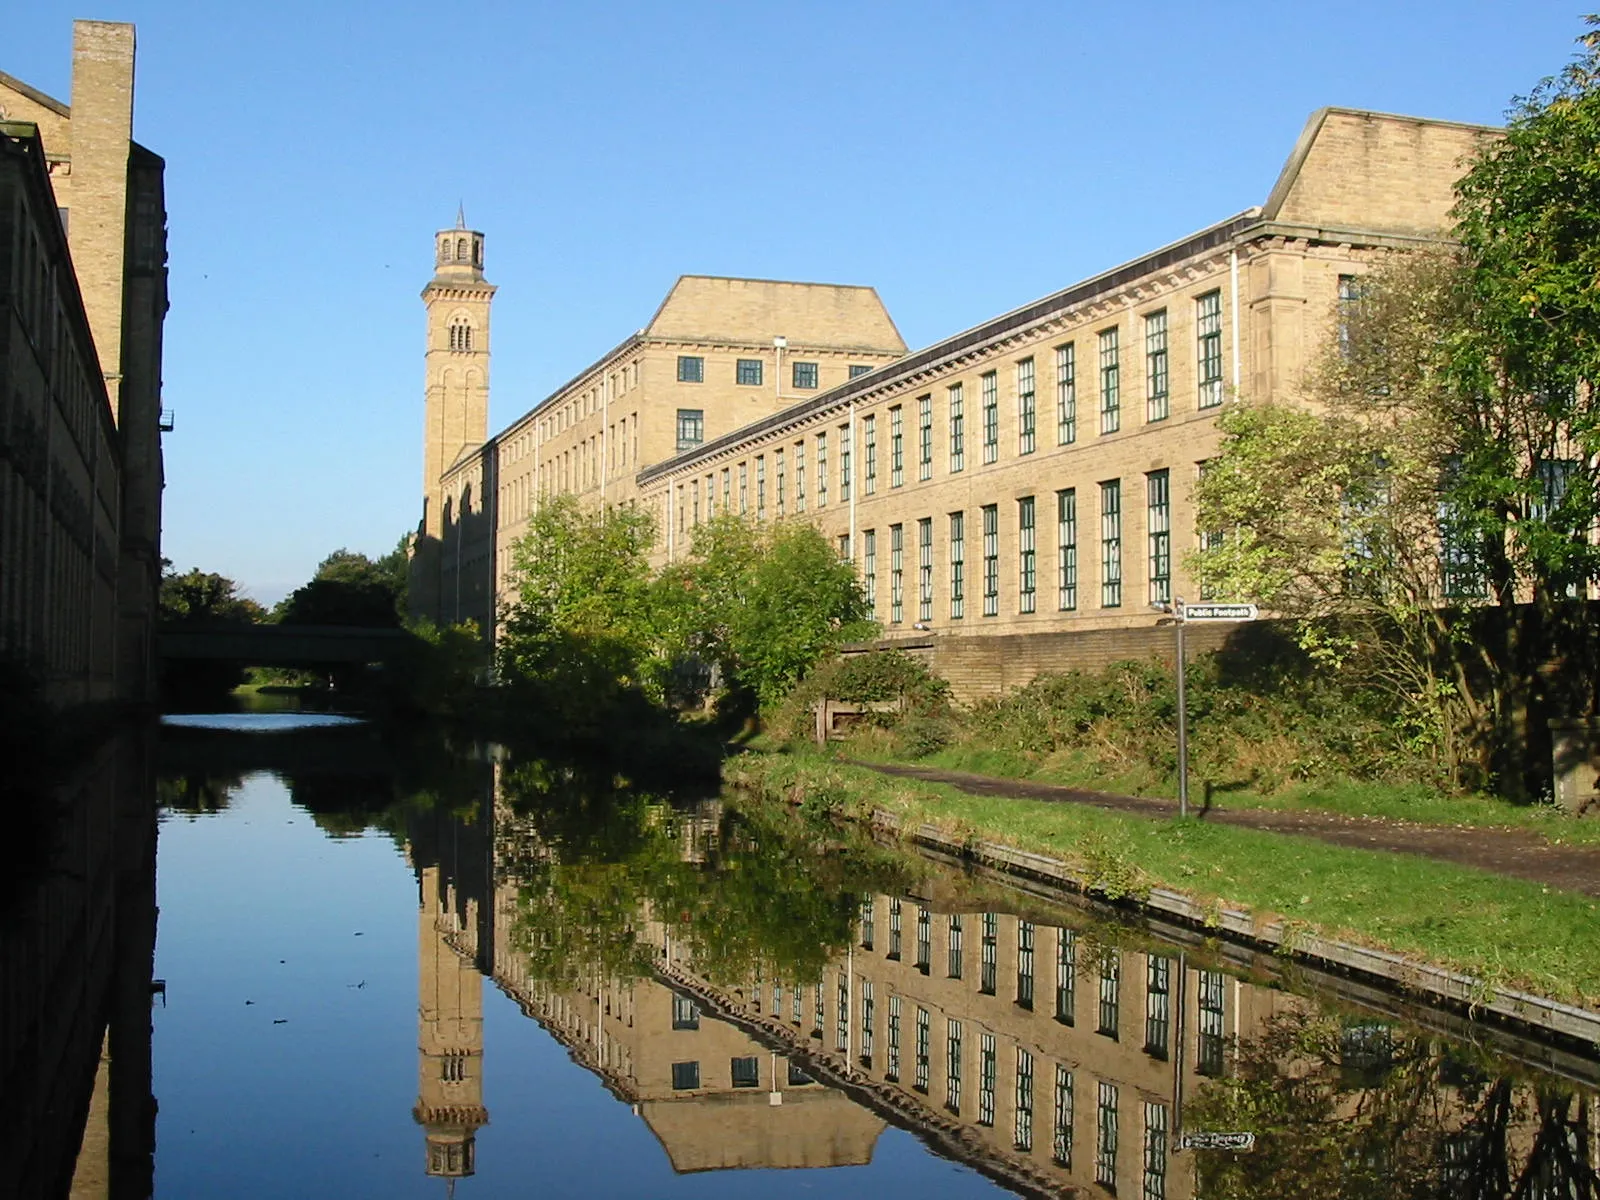 Photo showing: Titus Salt's mill in Saltaire, Bradford is an UNESCO World Heritage Site. Leeds to Liverpool Canal, Saltaire. Mill buildings built by Sir Titus Salt. Saltaire mills from the Leeds and Liverpool Canal. Salts Mill (left) and the New Mill (right) from the Leeds and Liverpool Canal.